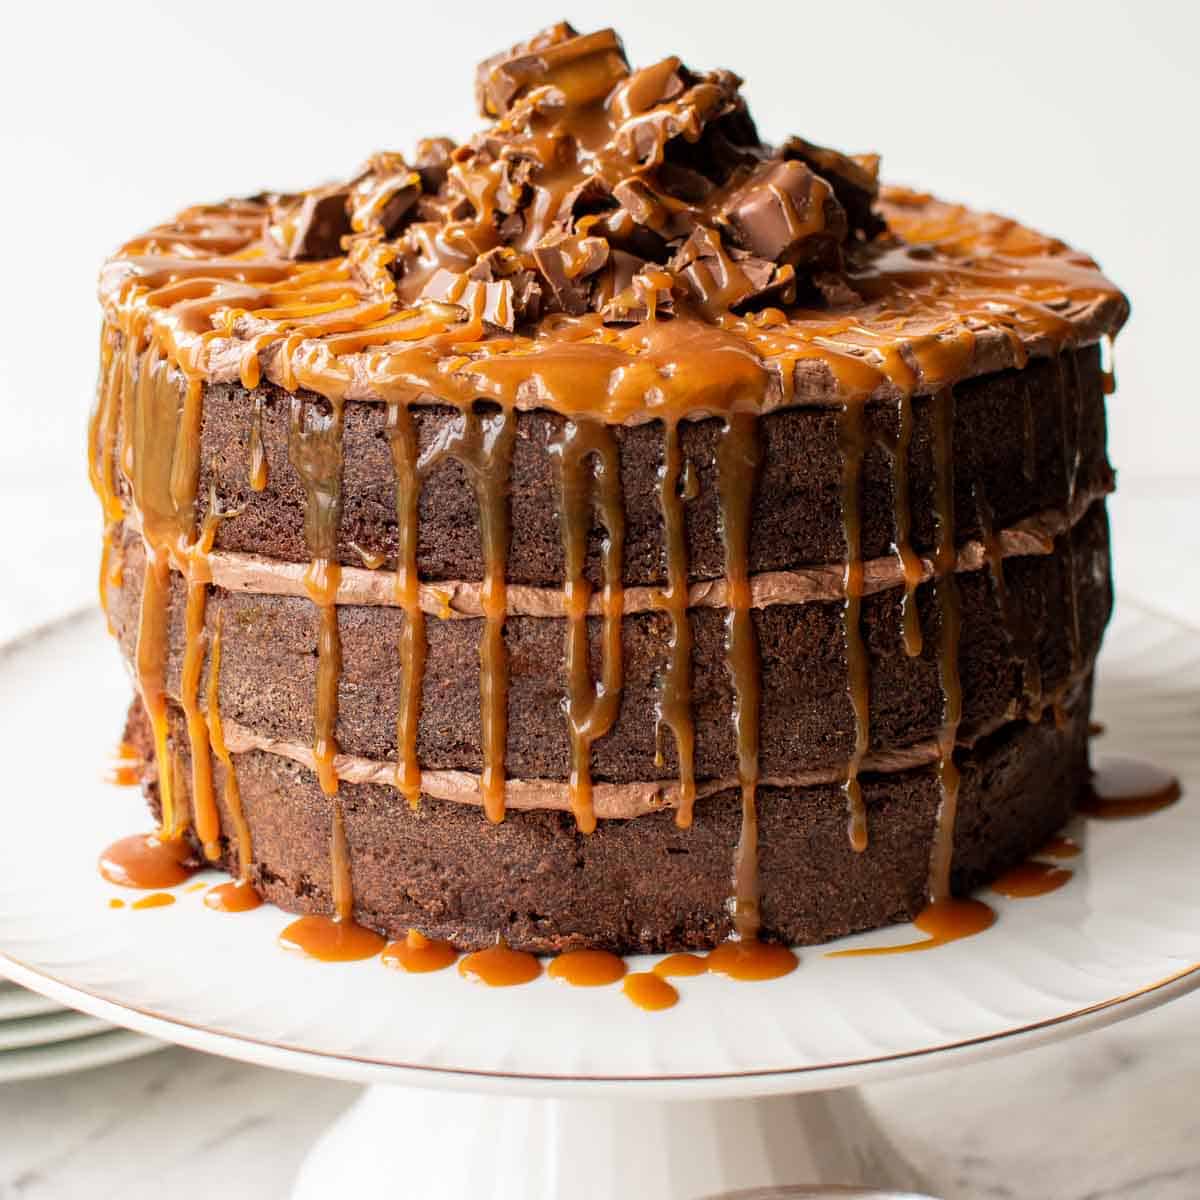 Chocolate Cake with Caramel {Step by Step} | Marcellina In Cucina